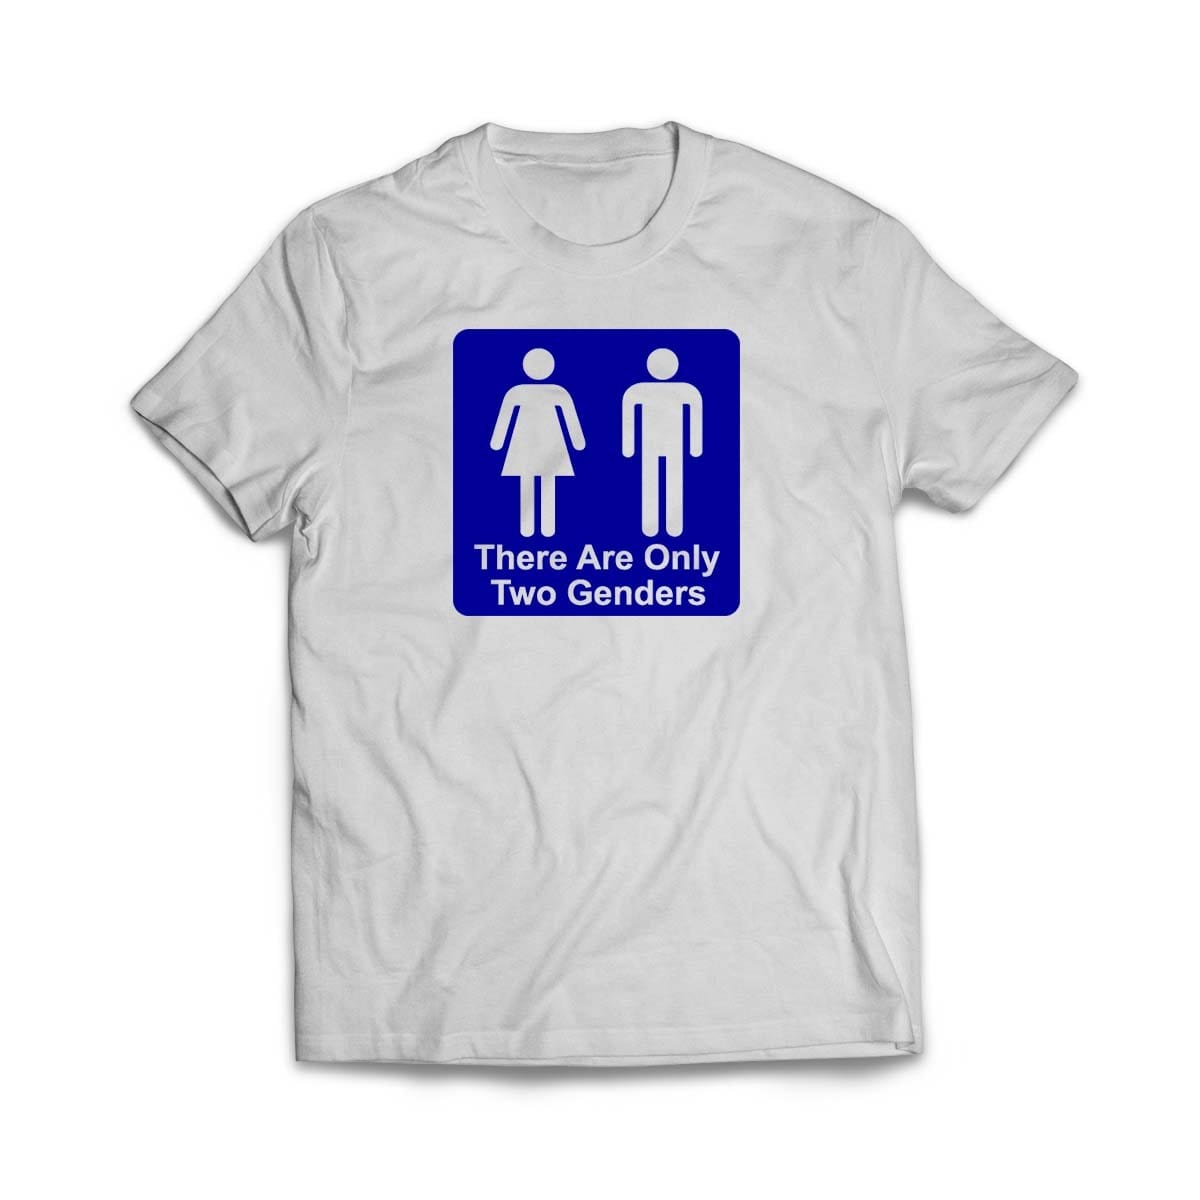 There are only two genders Red Tee Shirt